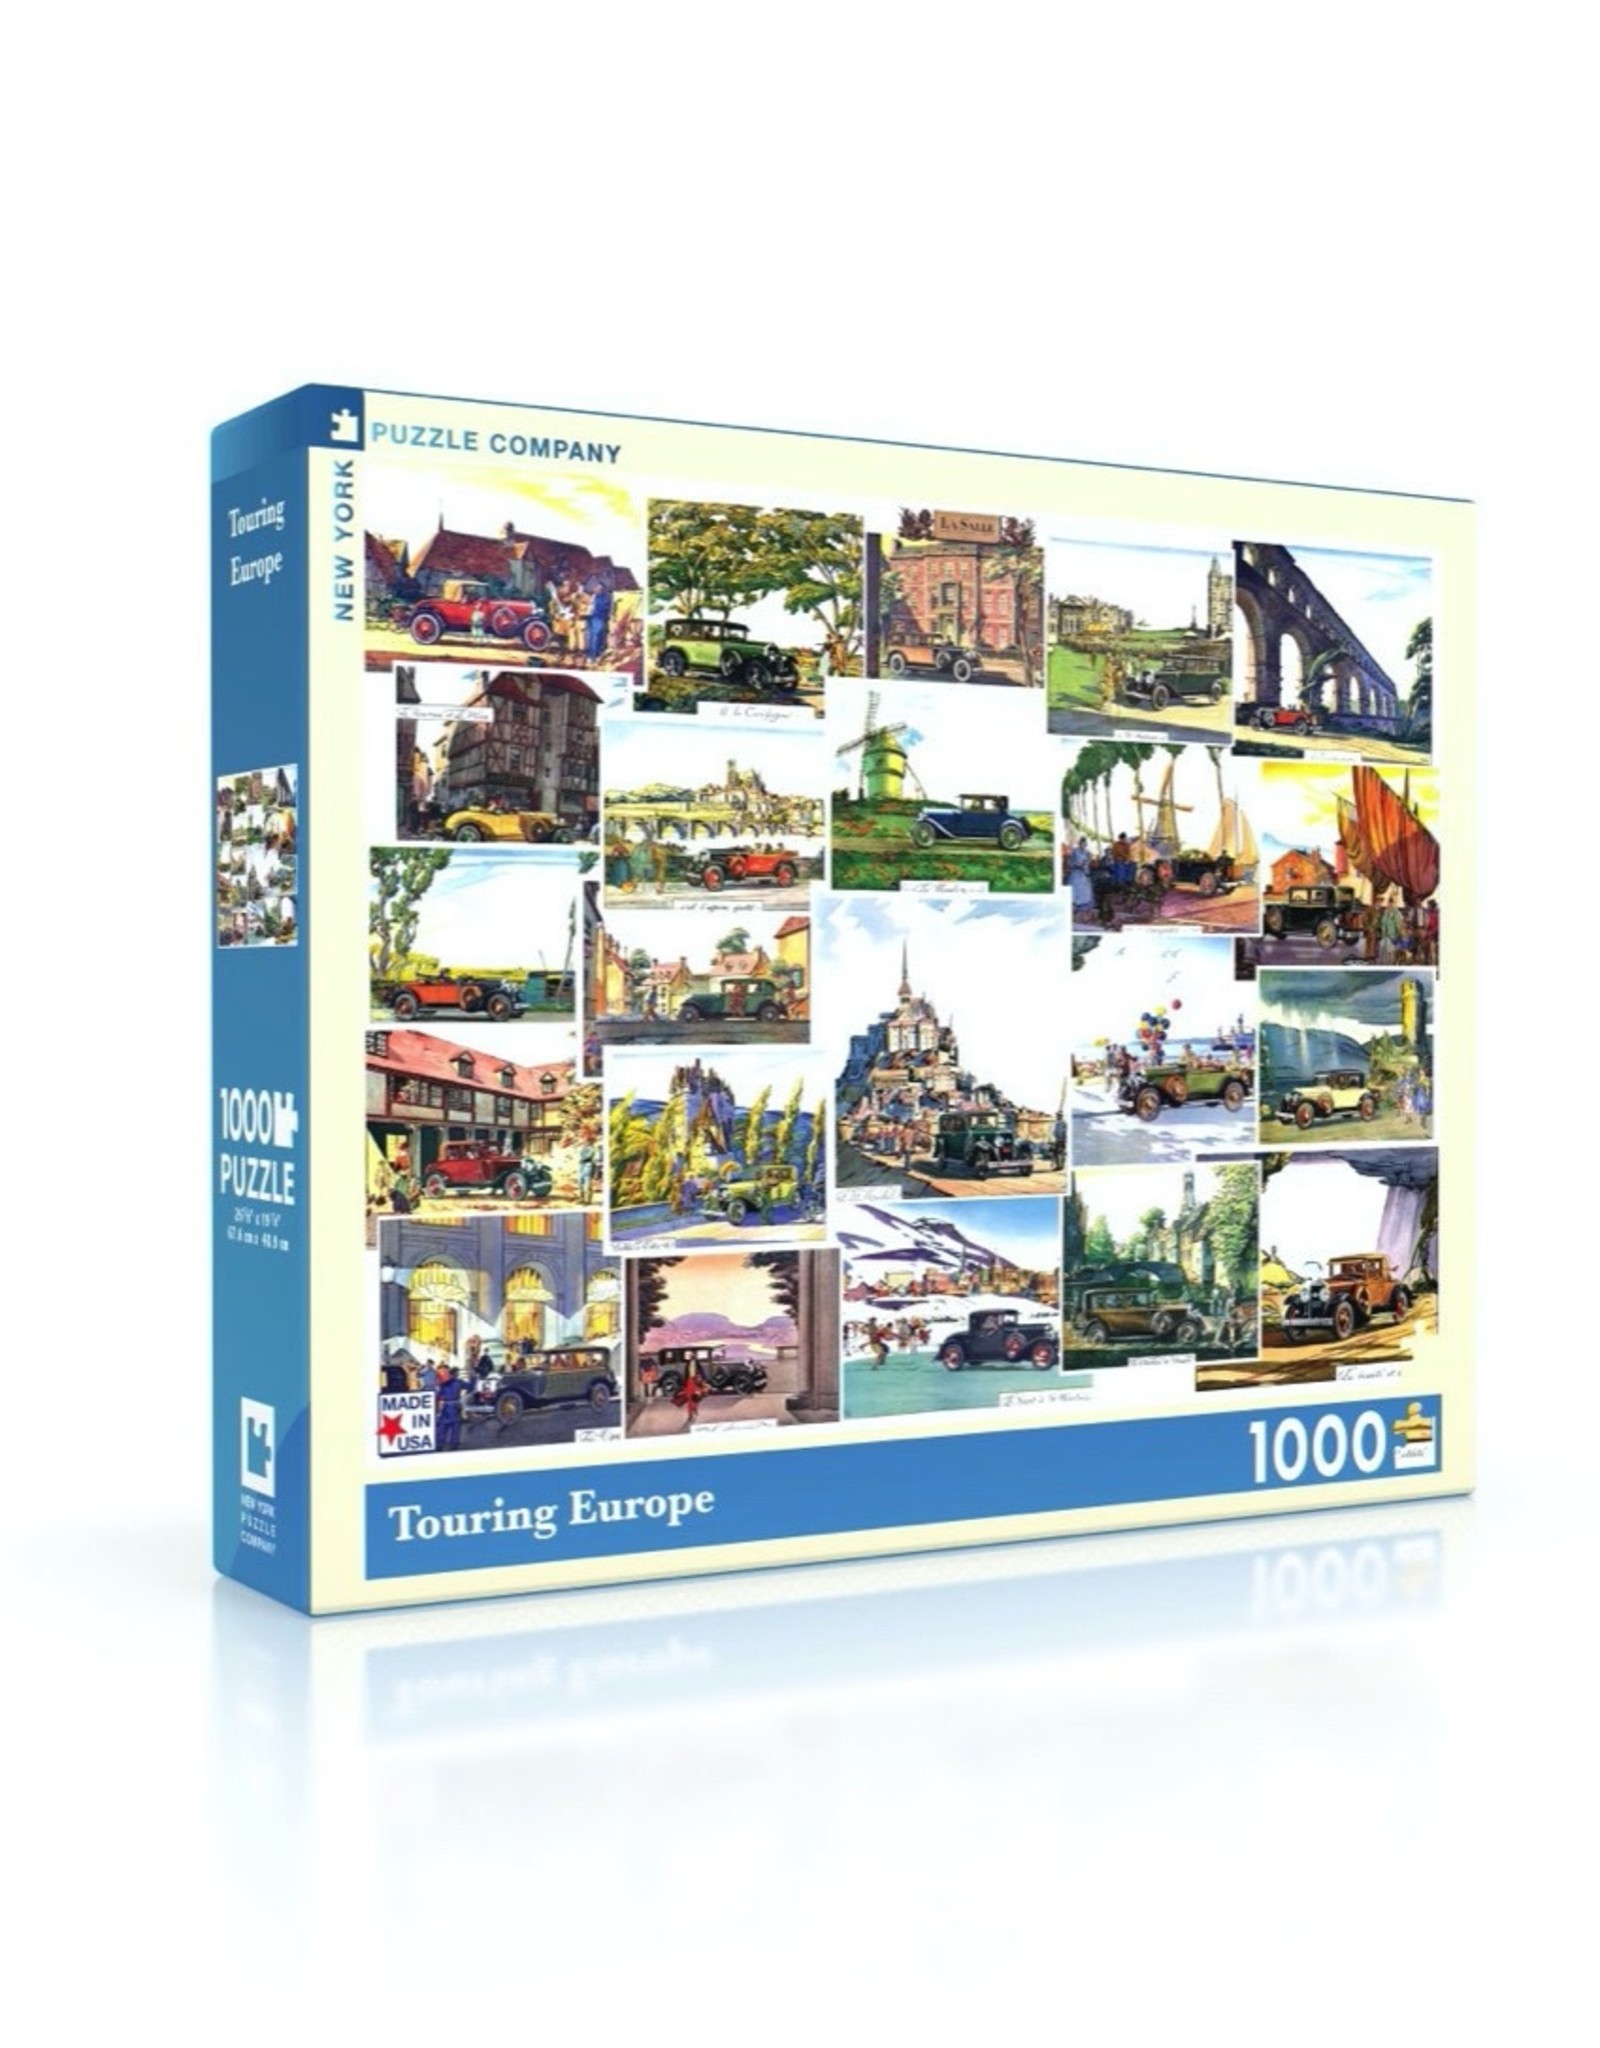 New York Puzzle Company Touring Europe 1000pc Jigsaw Puzzle